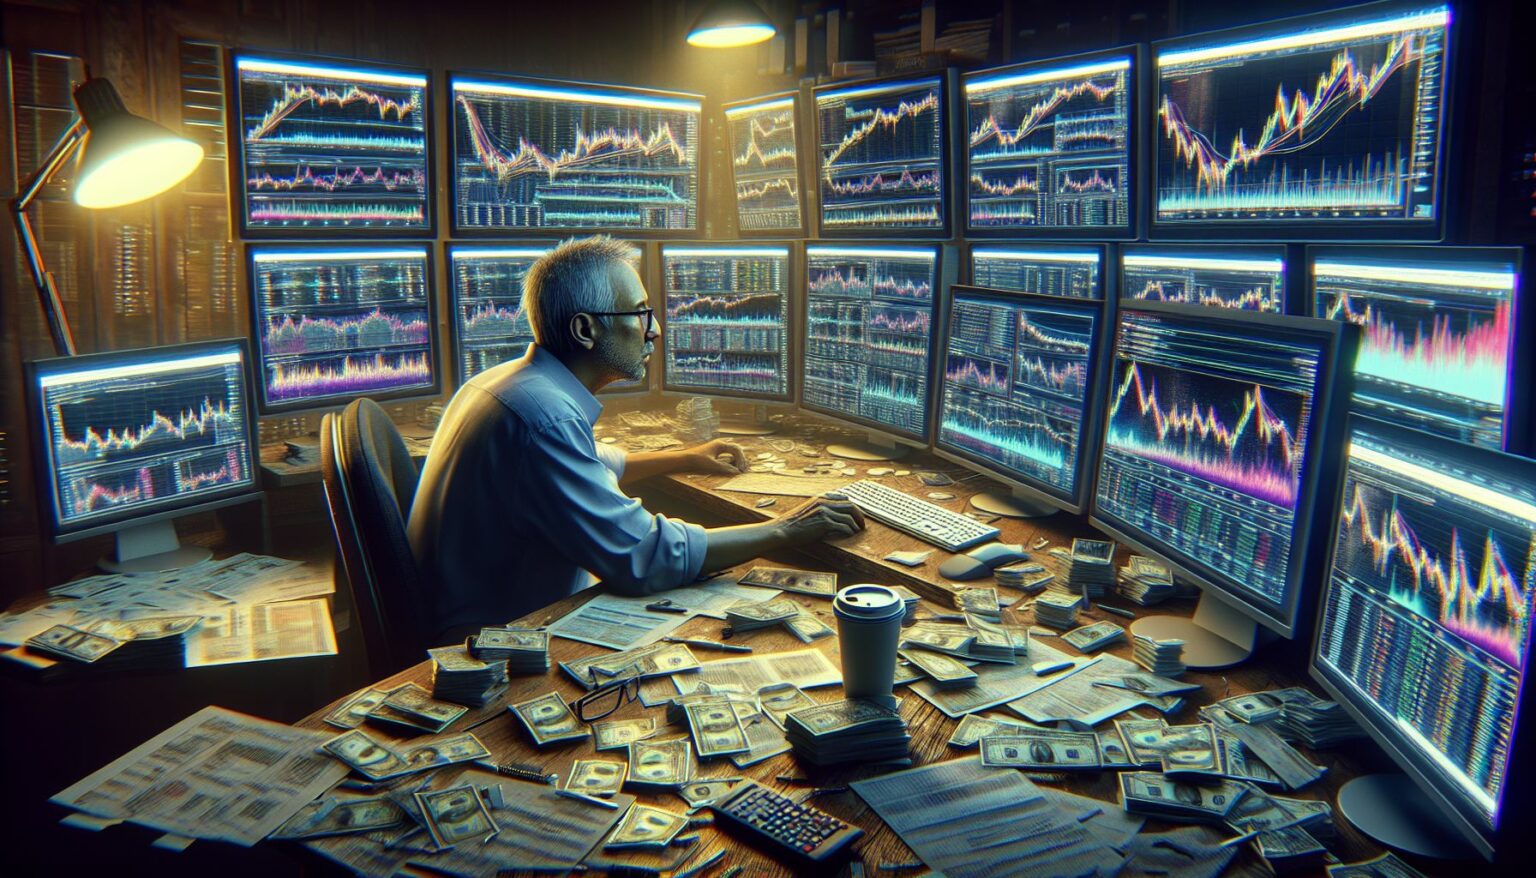 cryptocurrency trading charts and experienced trader analyzing data